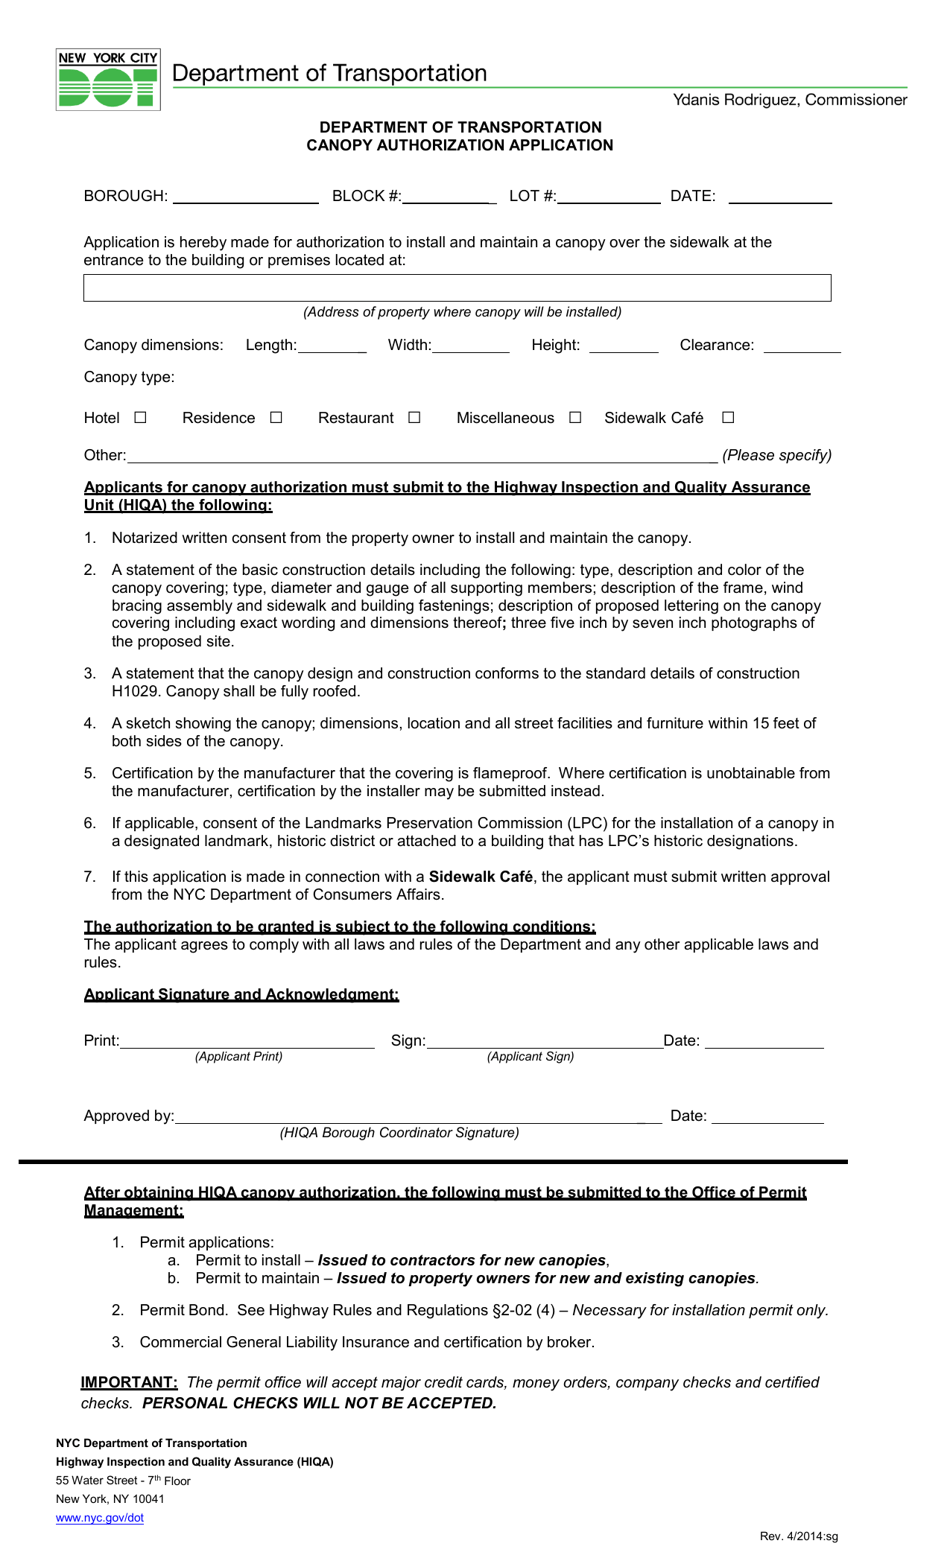 Canopy Authorization Application - New York City, Page 1